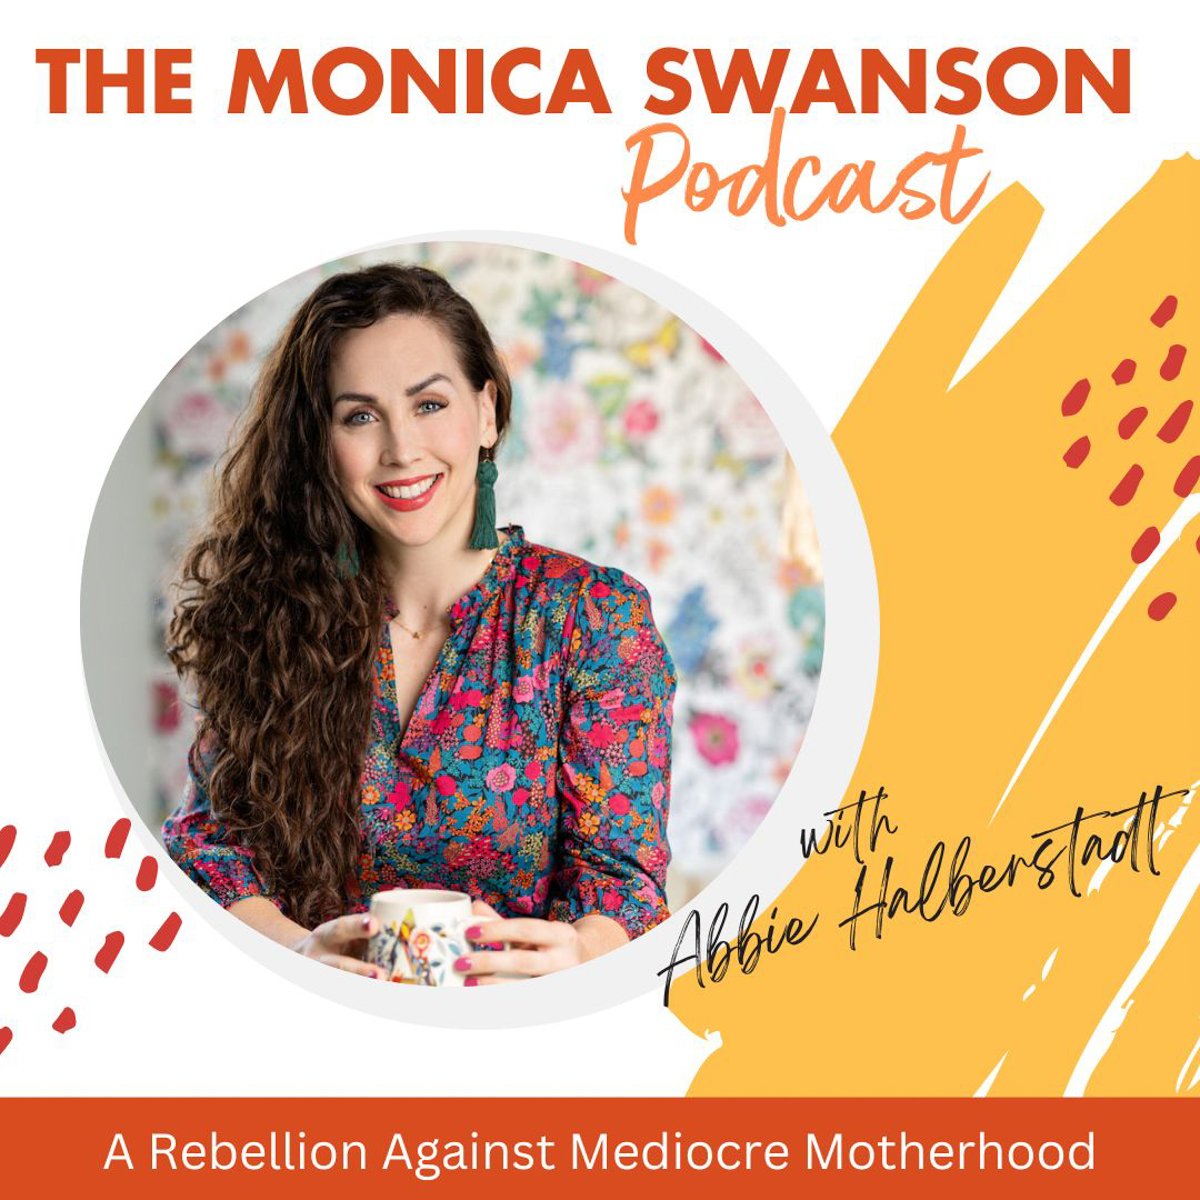 A Rebellion Against Mediocre Motherhood, with Abbie Halberstadt